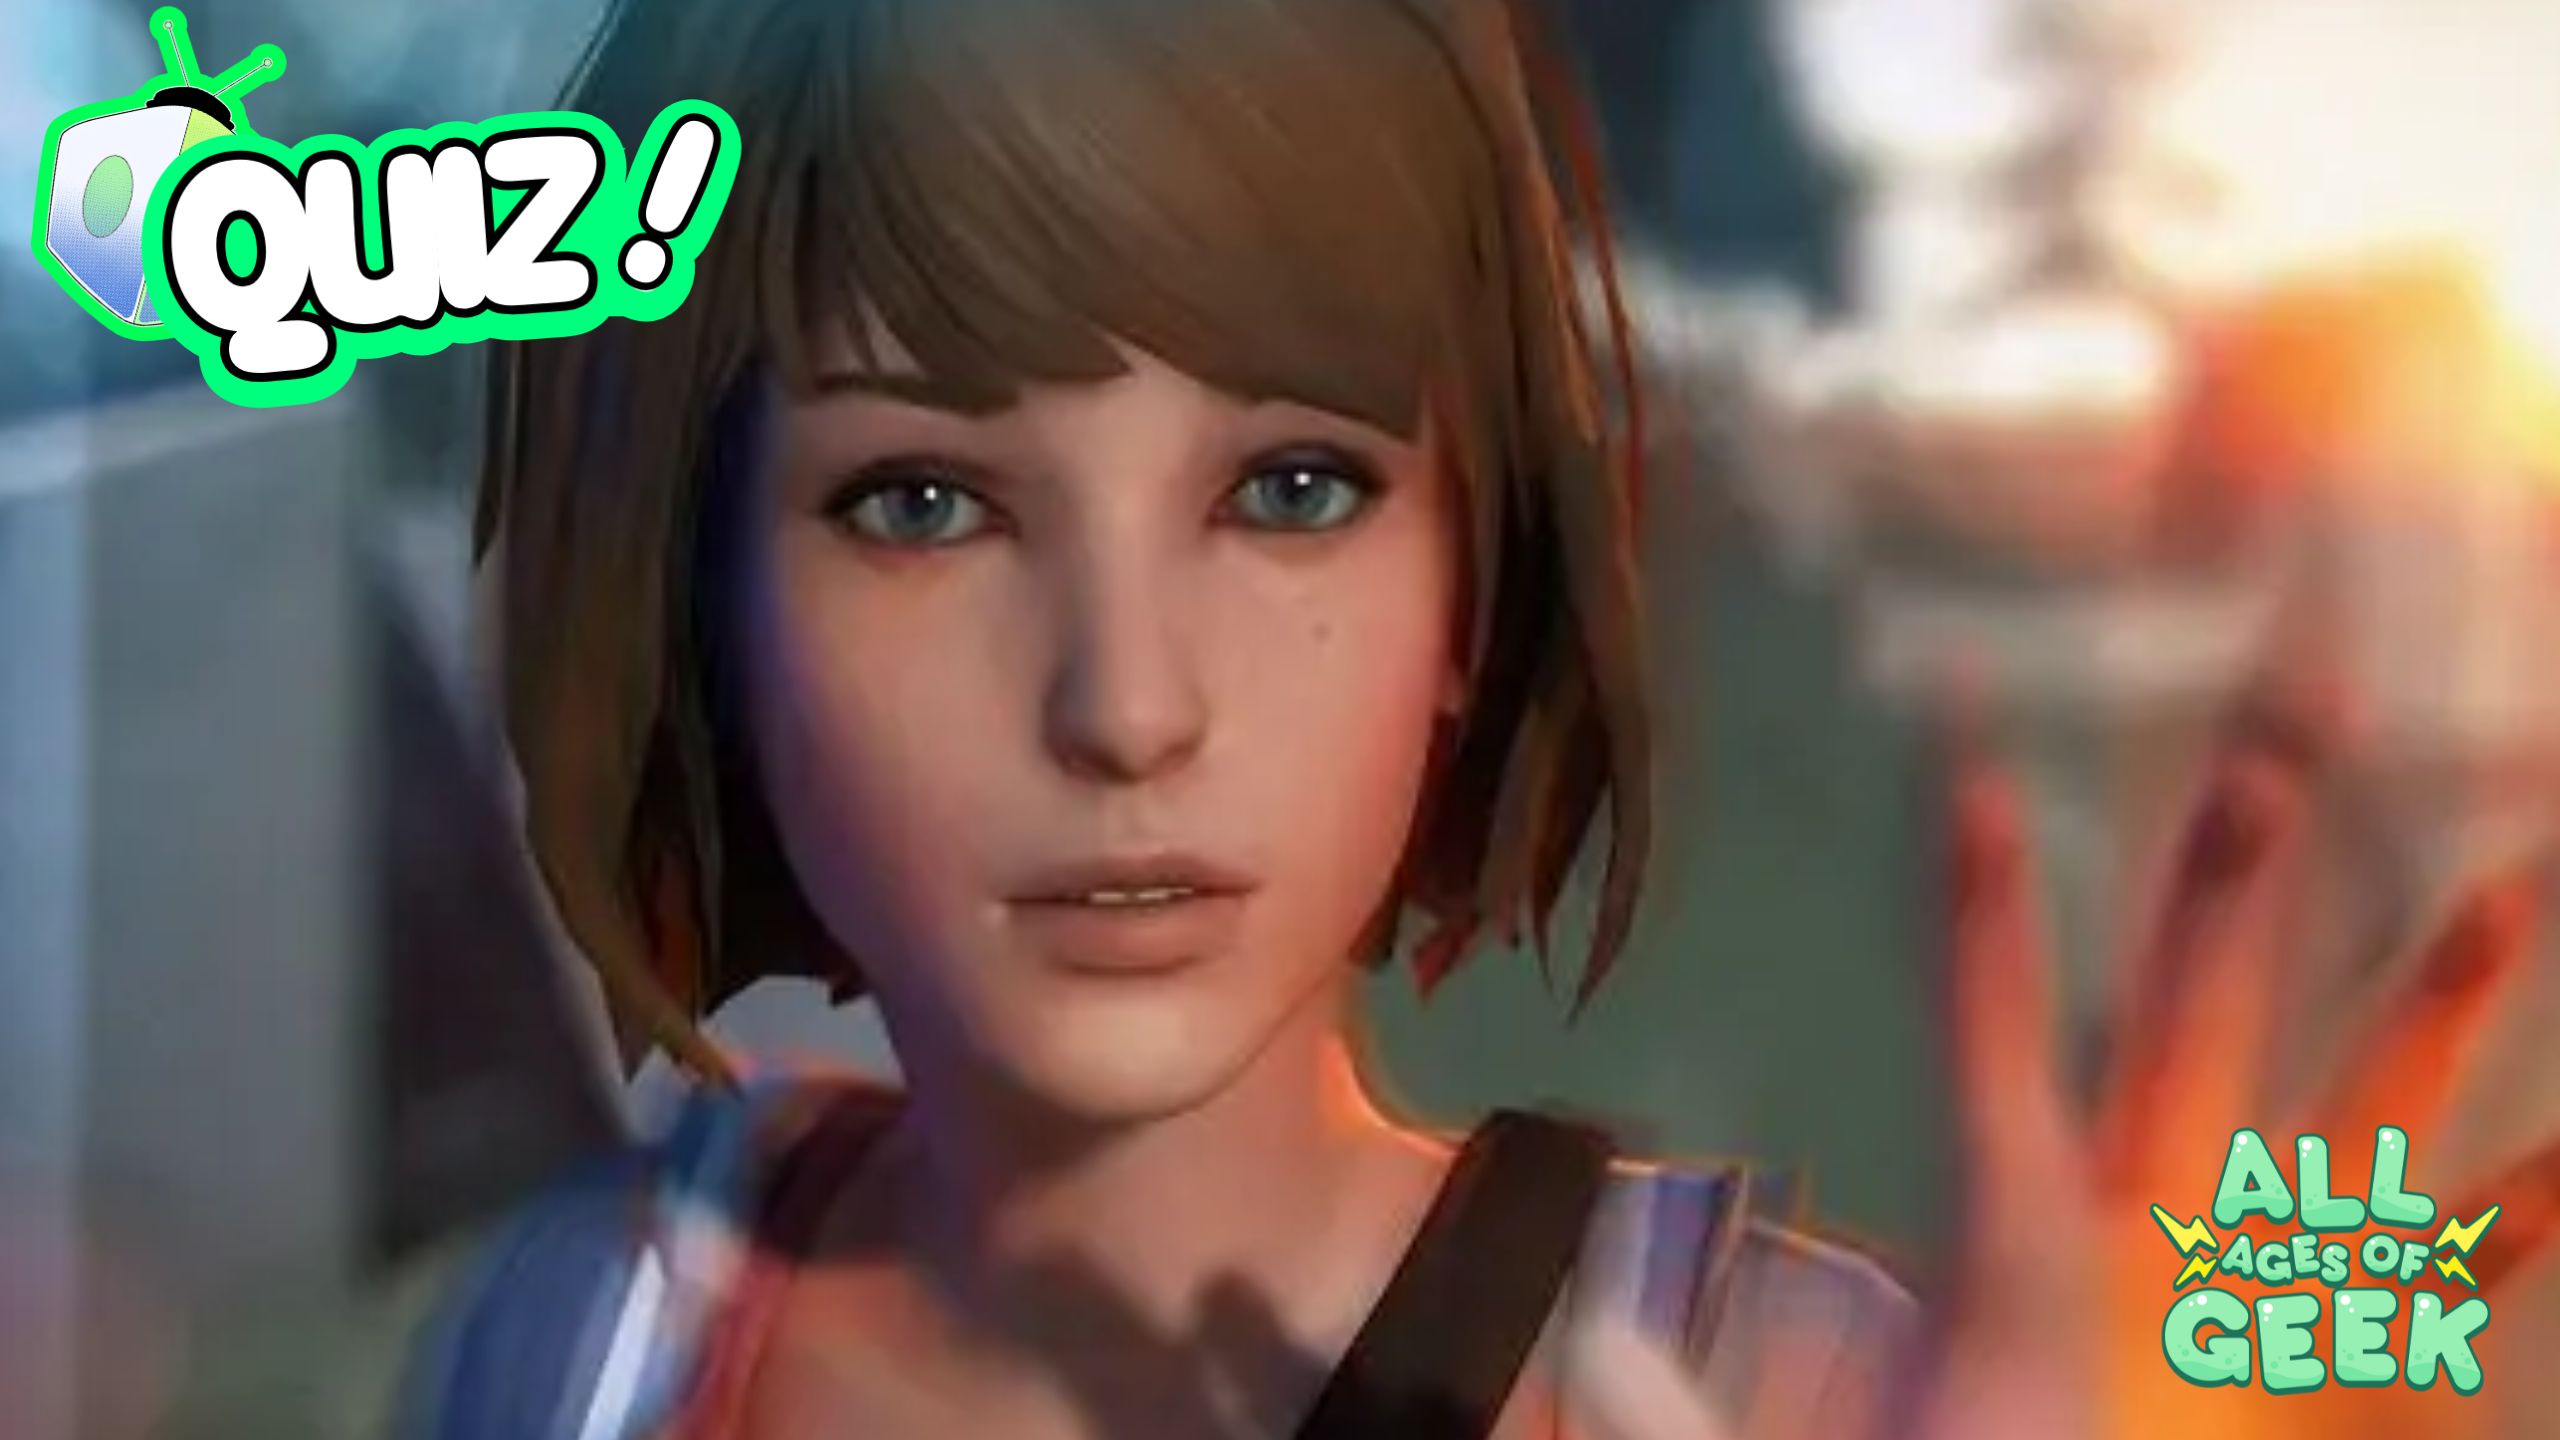 A graphic of a young woman with short brown hair and blue eyes from the video game "Life is Strange," looking intently at her hand, which is glowing and positioned as if she is about to manipulate time. The word "QUIZ!" in bold, cartoonish green letters with a TV antenna motif on the top is placed in the upper left corner, and the logo "ALL AGES OF GEEK" in orange and green is in the bottom right corner, indicating a themed quiz for the game on their platform.